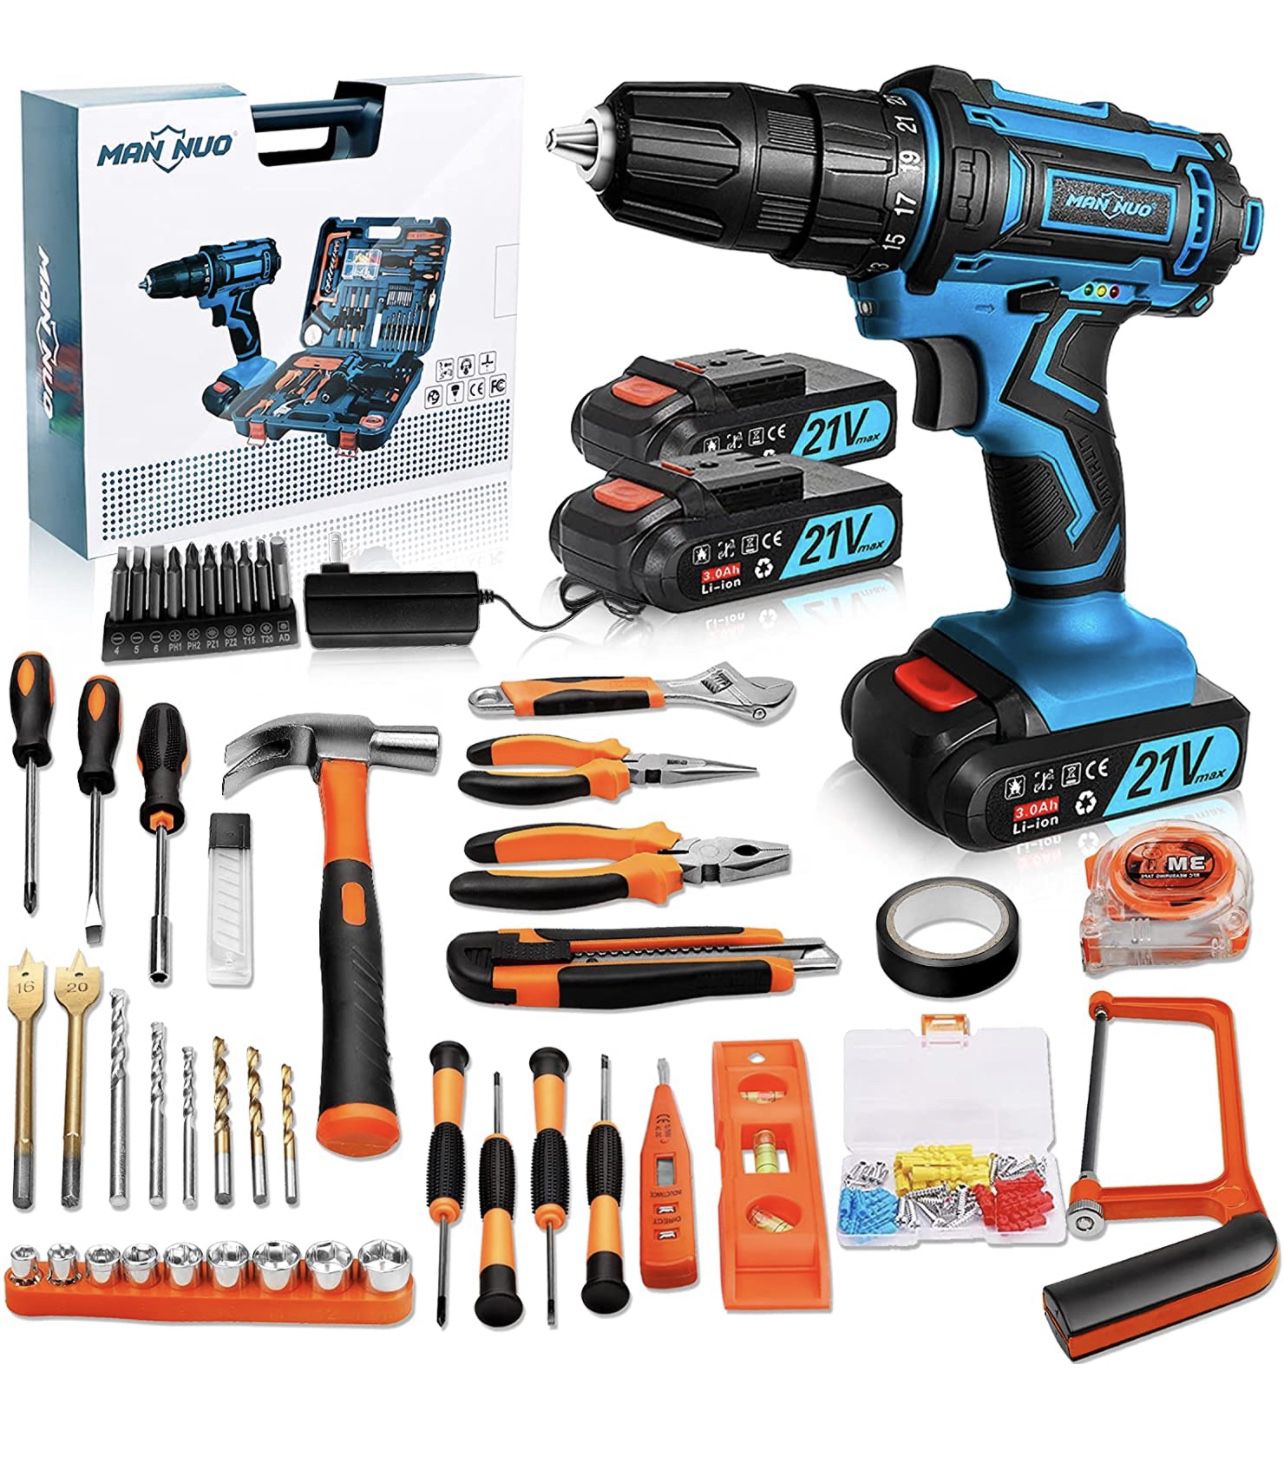 Cordless Drill Power Set, 21V Cordless Drill Set with 3000mAh Battery & Fast Charger, 117 Piece Power Tool Set Combo Kit with Power Drill Driver, Elec